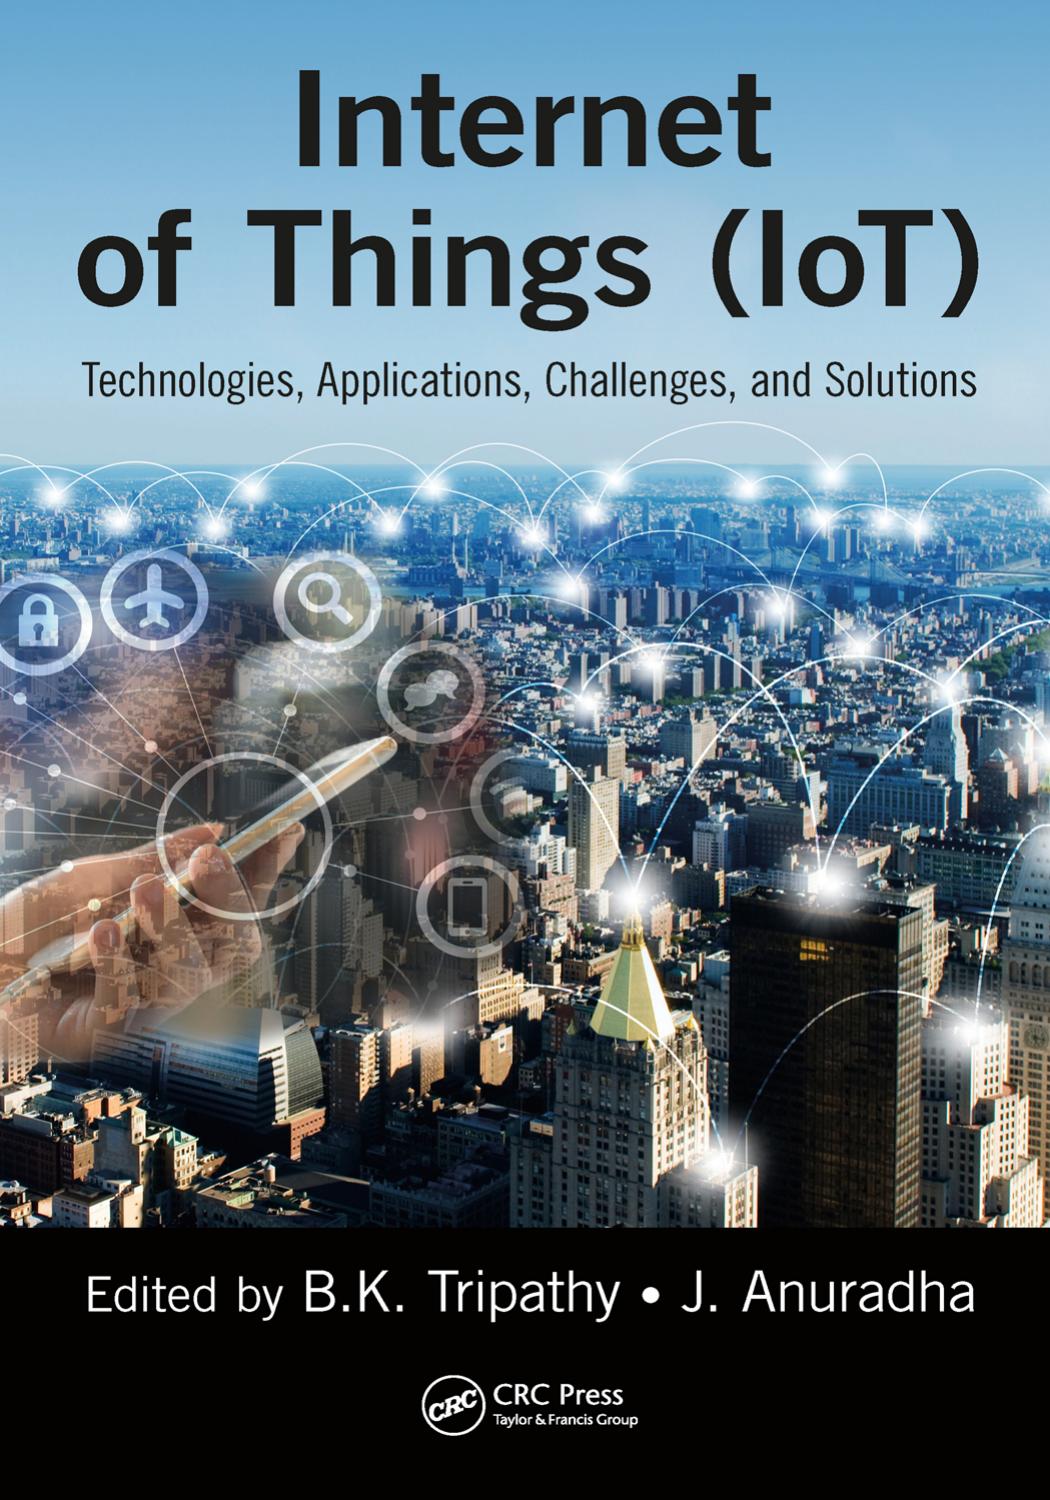 Internet of Things (IoT): Technologies, Applications, Challenges and Solutions